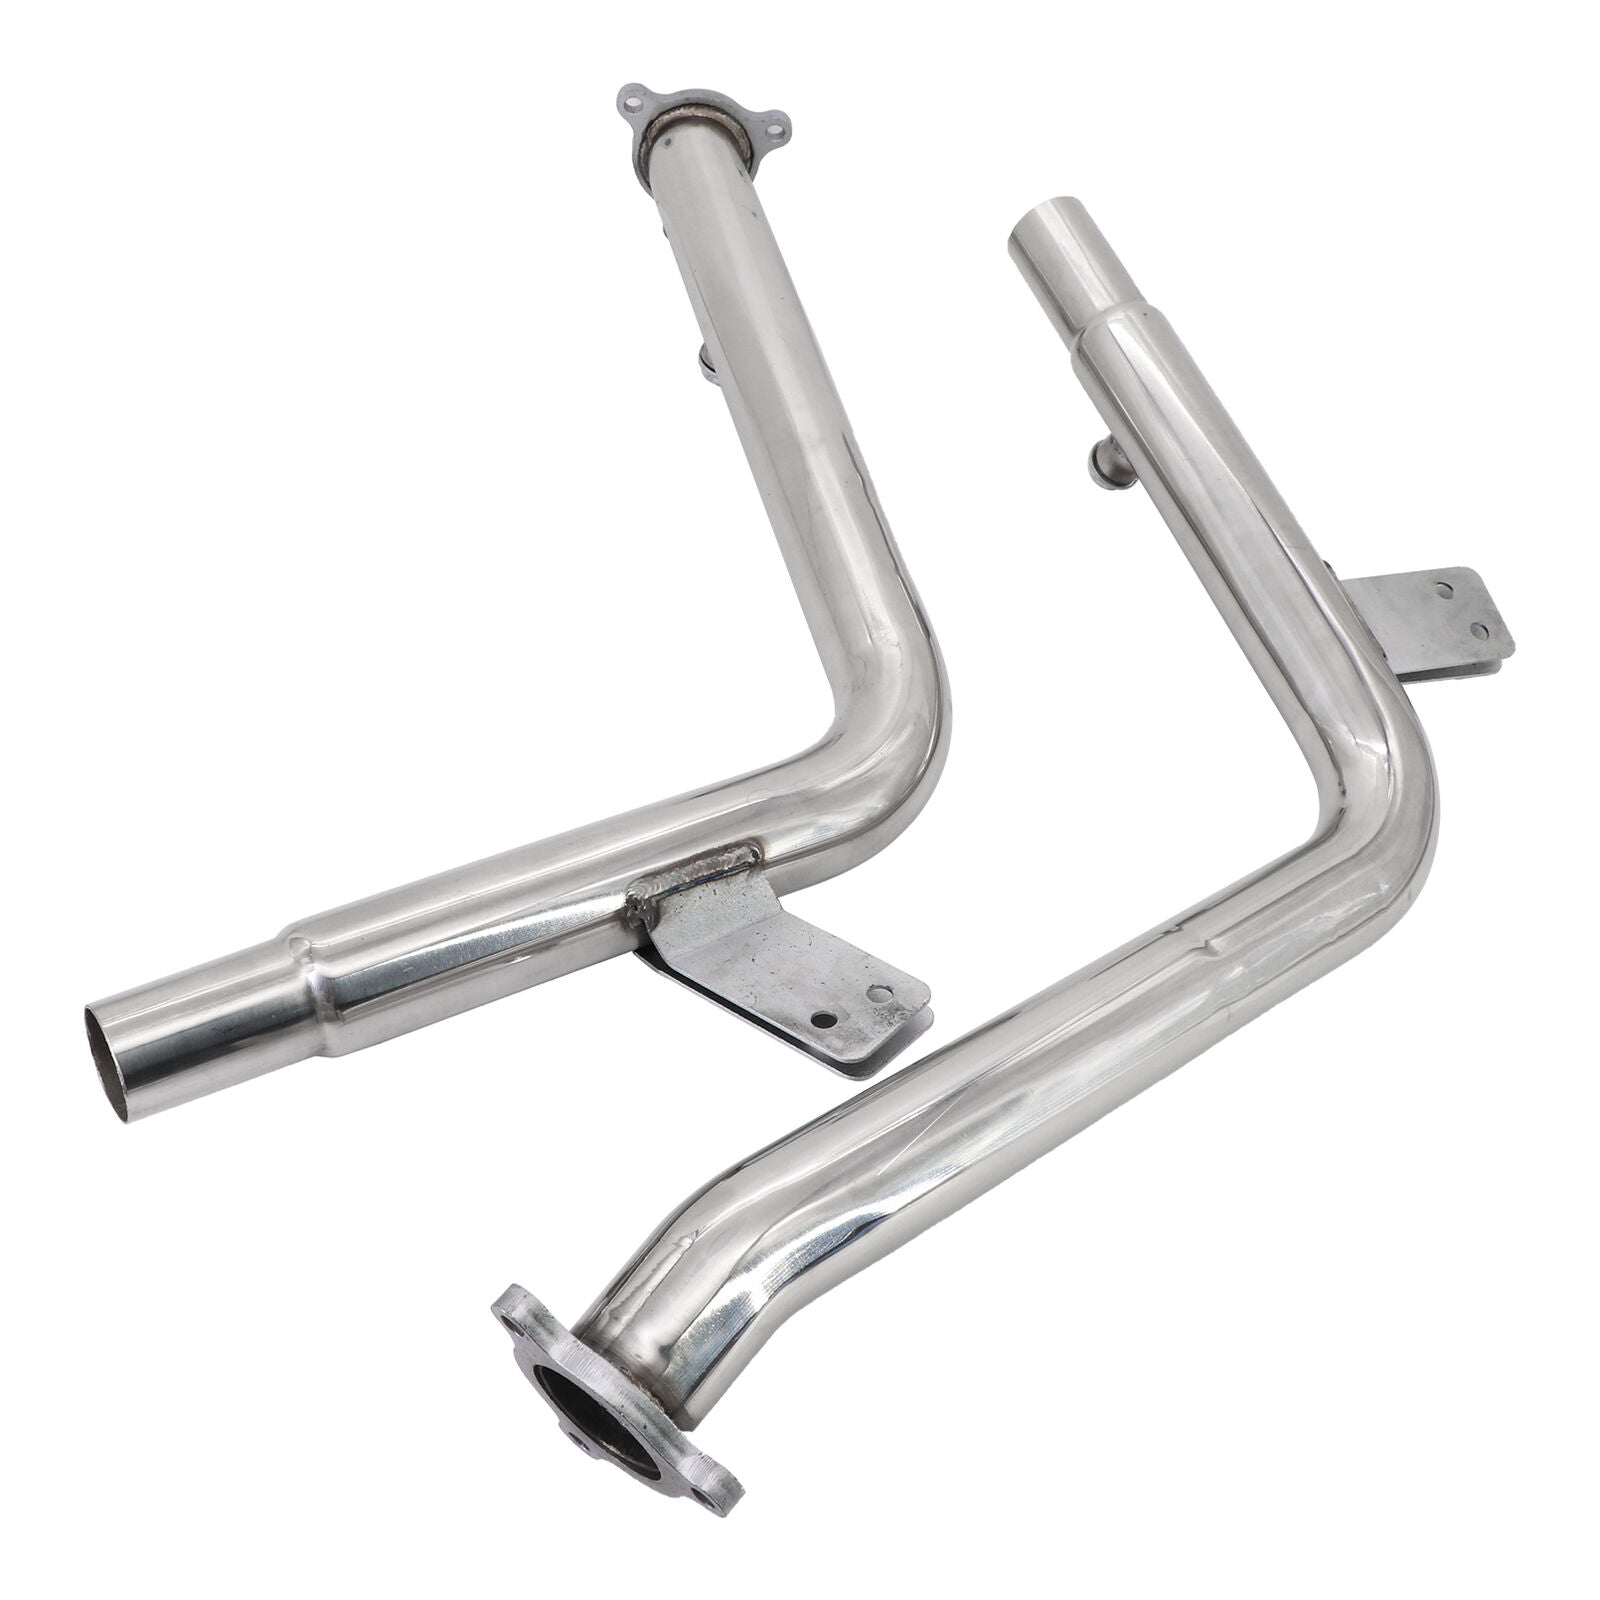 Porsche 2000-2004 Boxster 986 2.7L 3.2L Downpipe Exhaust Stainless Steel